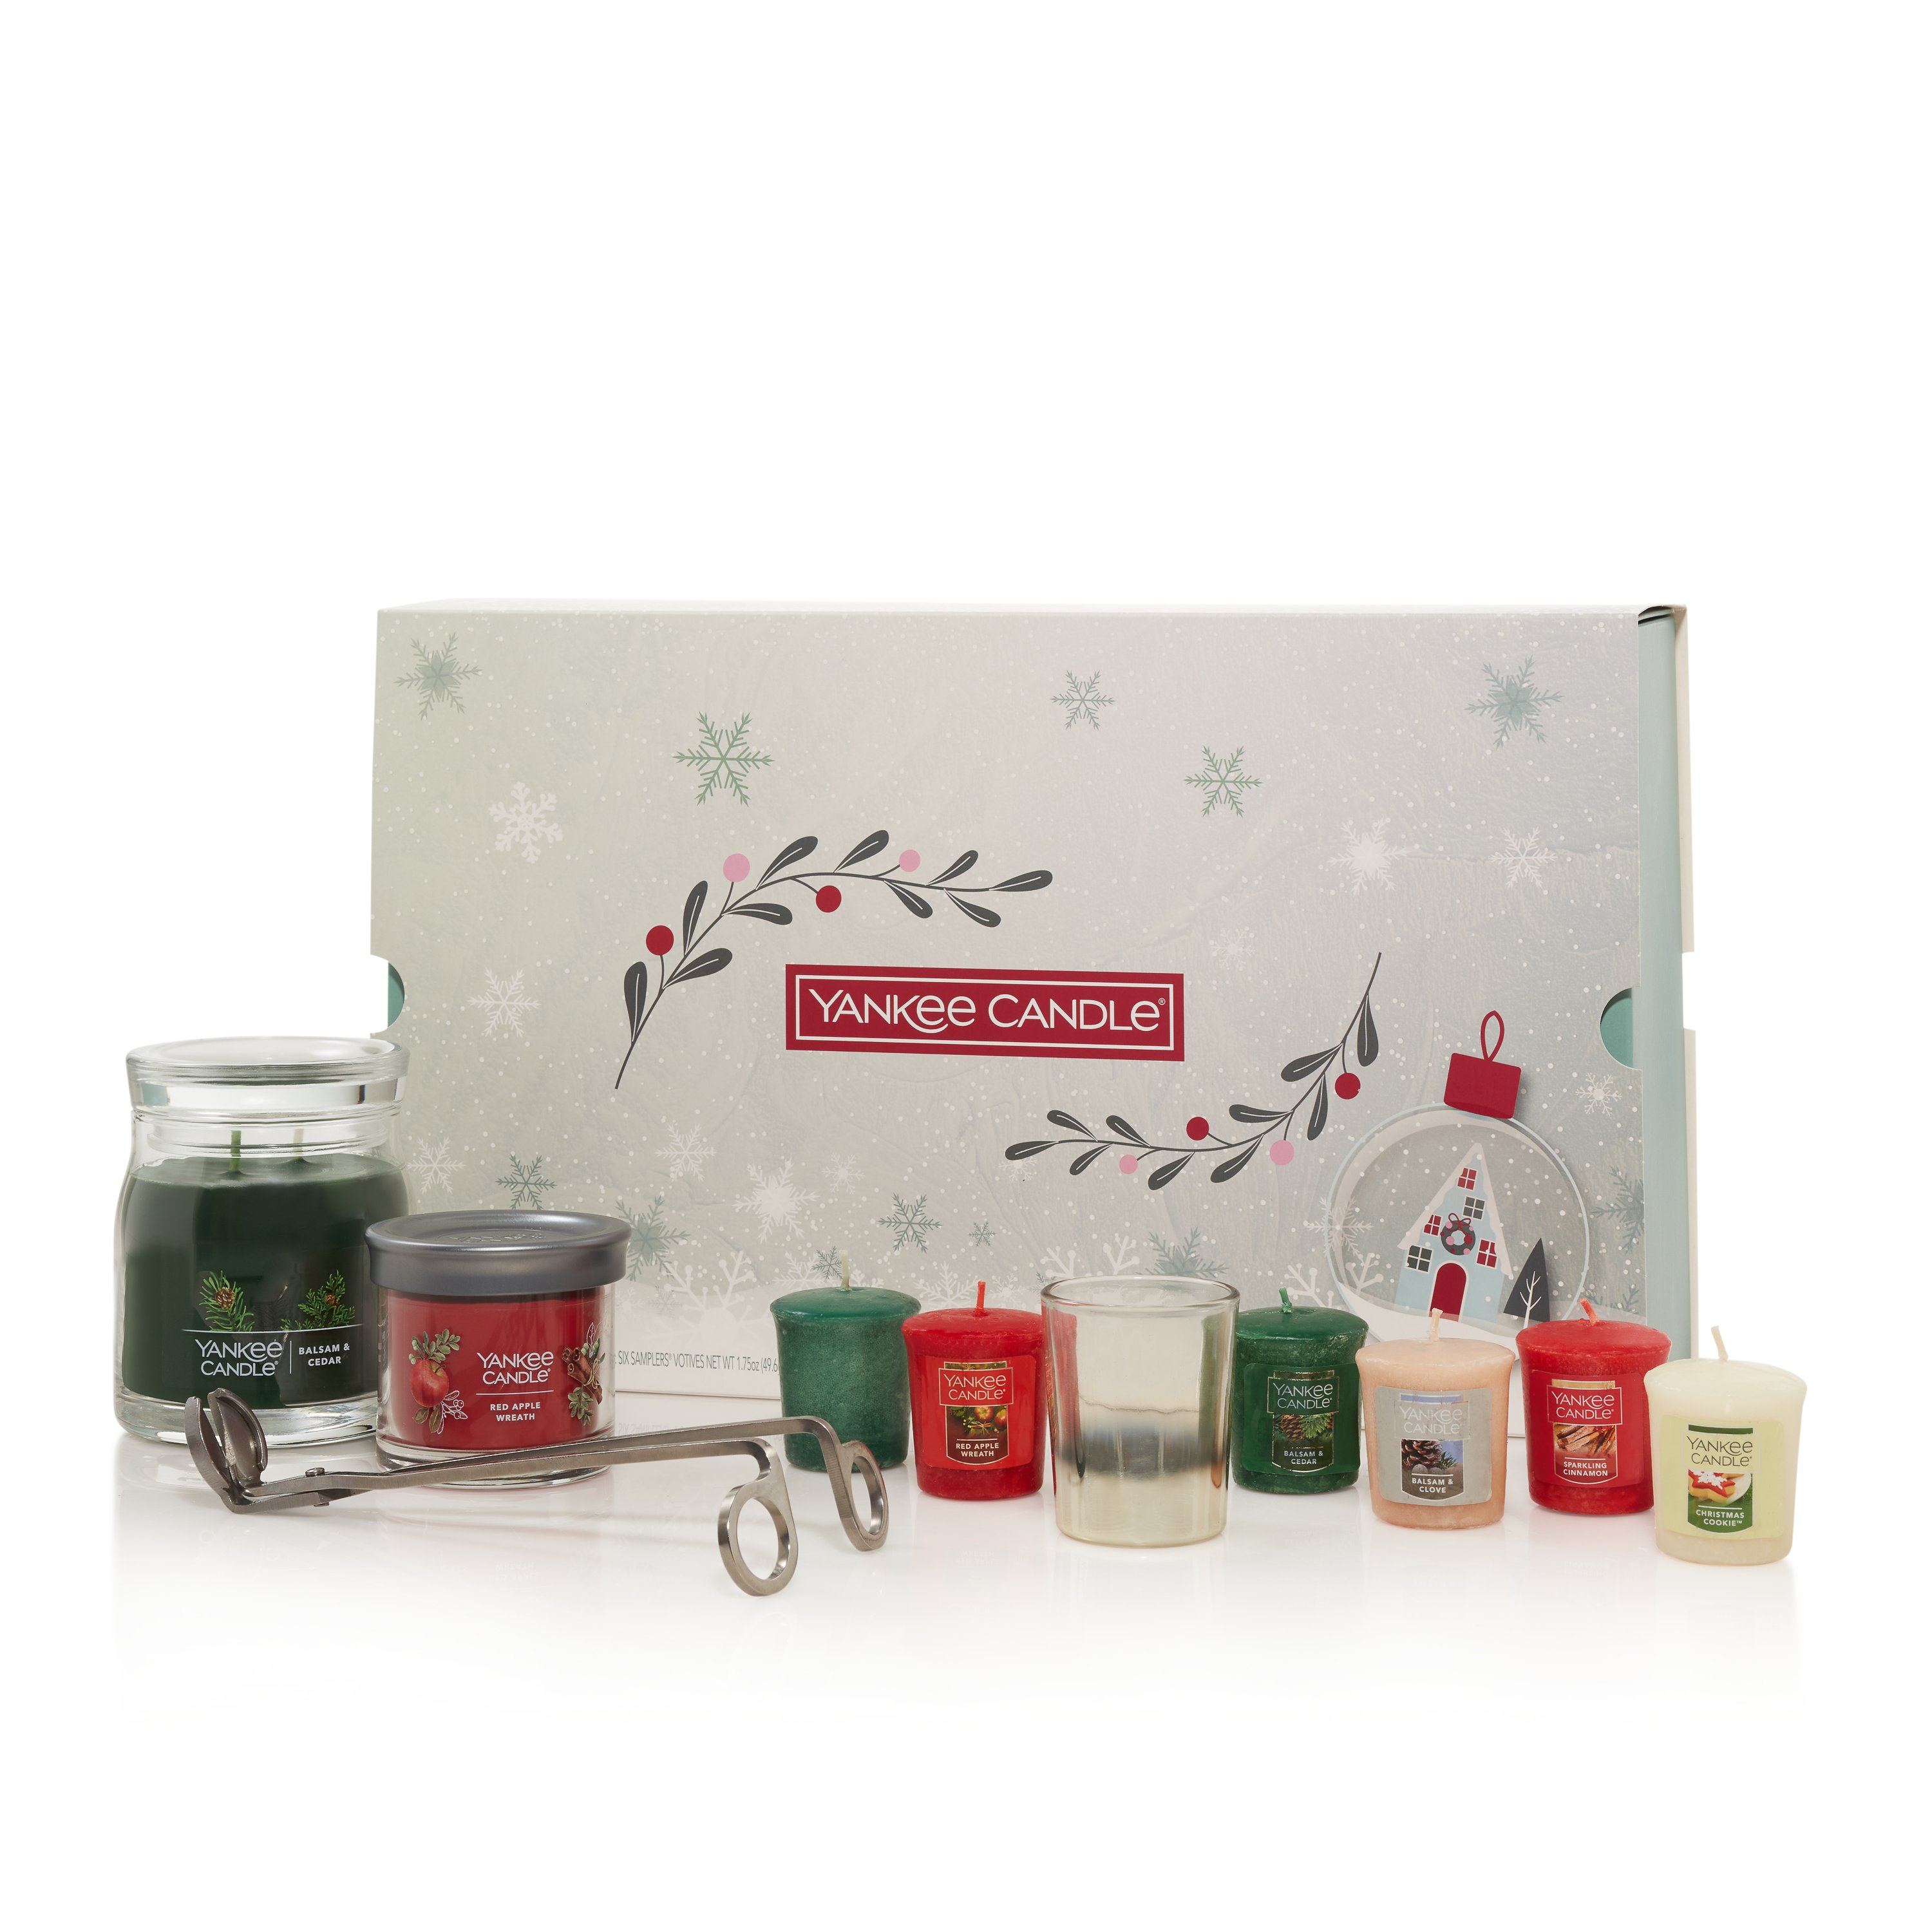 Yankee Candle Gift Set 12 Signature Scented Votive Candles Christmas  Collection